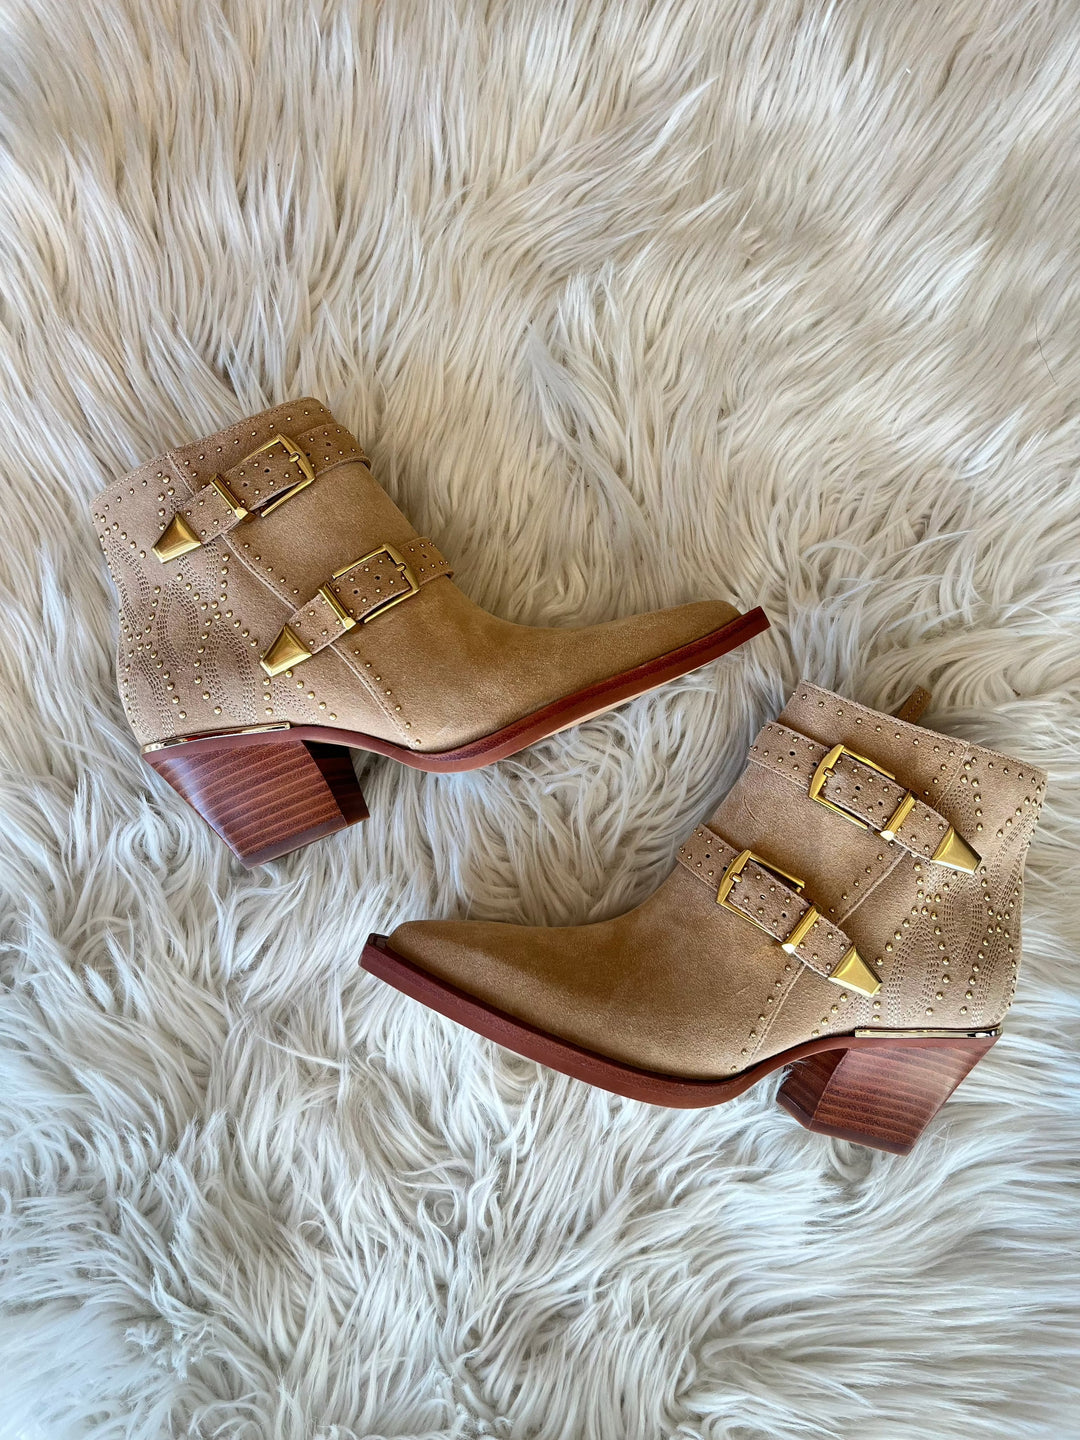 Dolce Vita Ronnie Boots, Shoes, Dolce Vita, Adeline, dallas boutique, dallas texas, texas boutique, women's boutique dallas, adeline boutique, dallas boutique, trendy boutique, affordable boutique